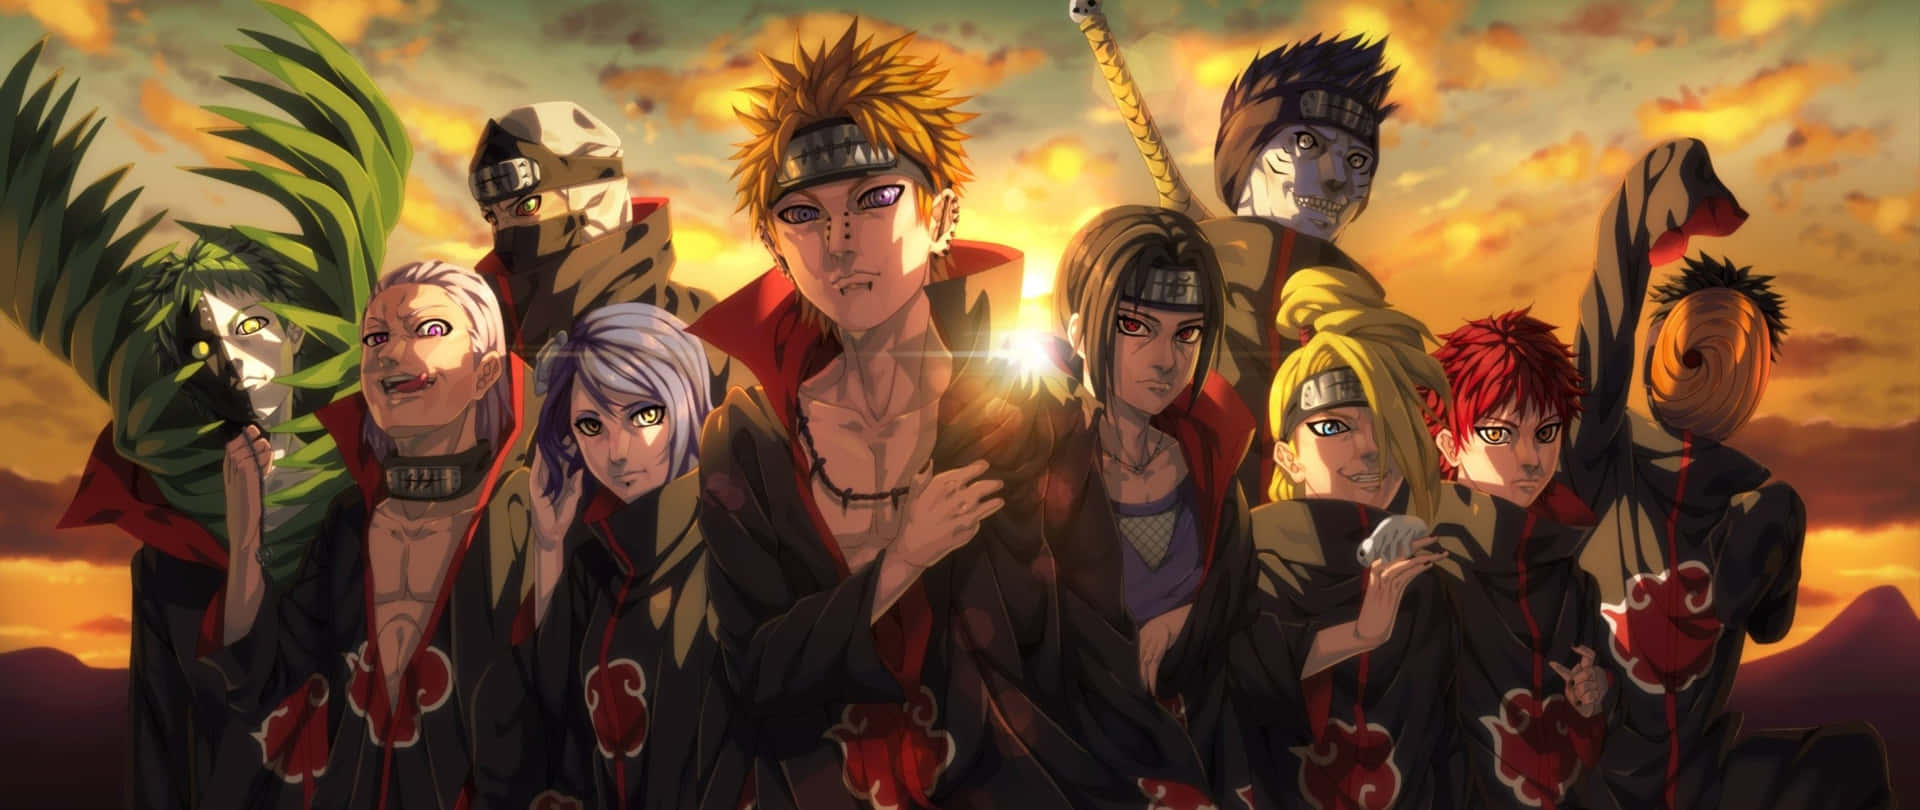 “The rage of a Sage - Naruto Pain in 4K” Wallpaper